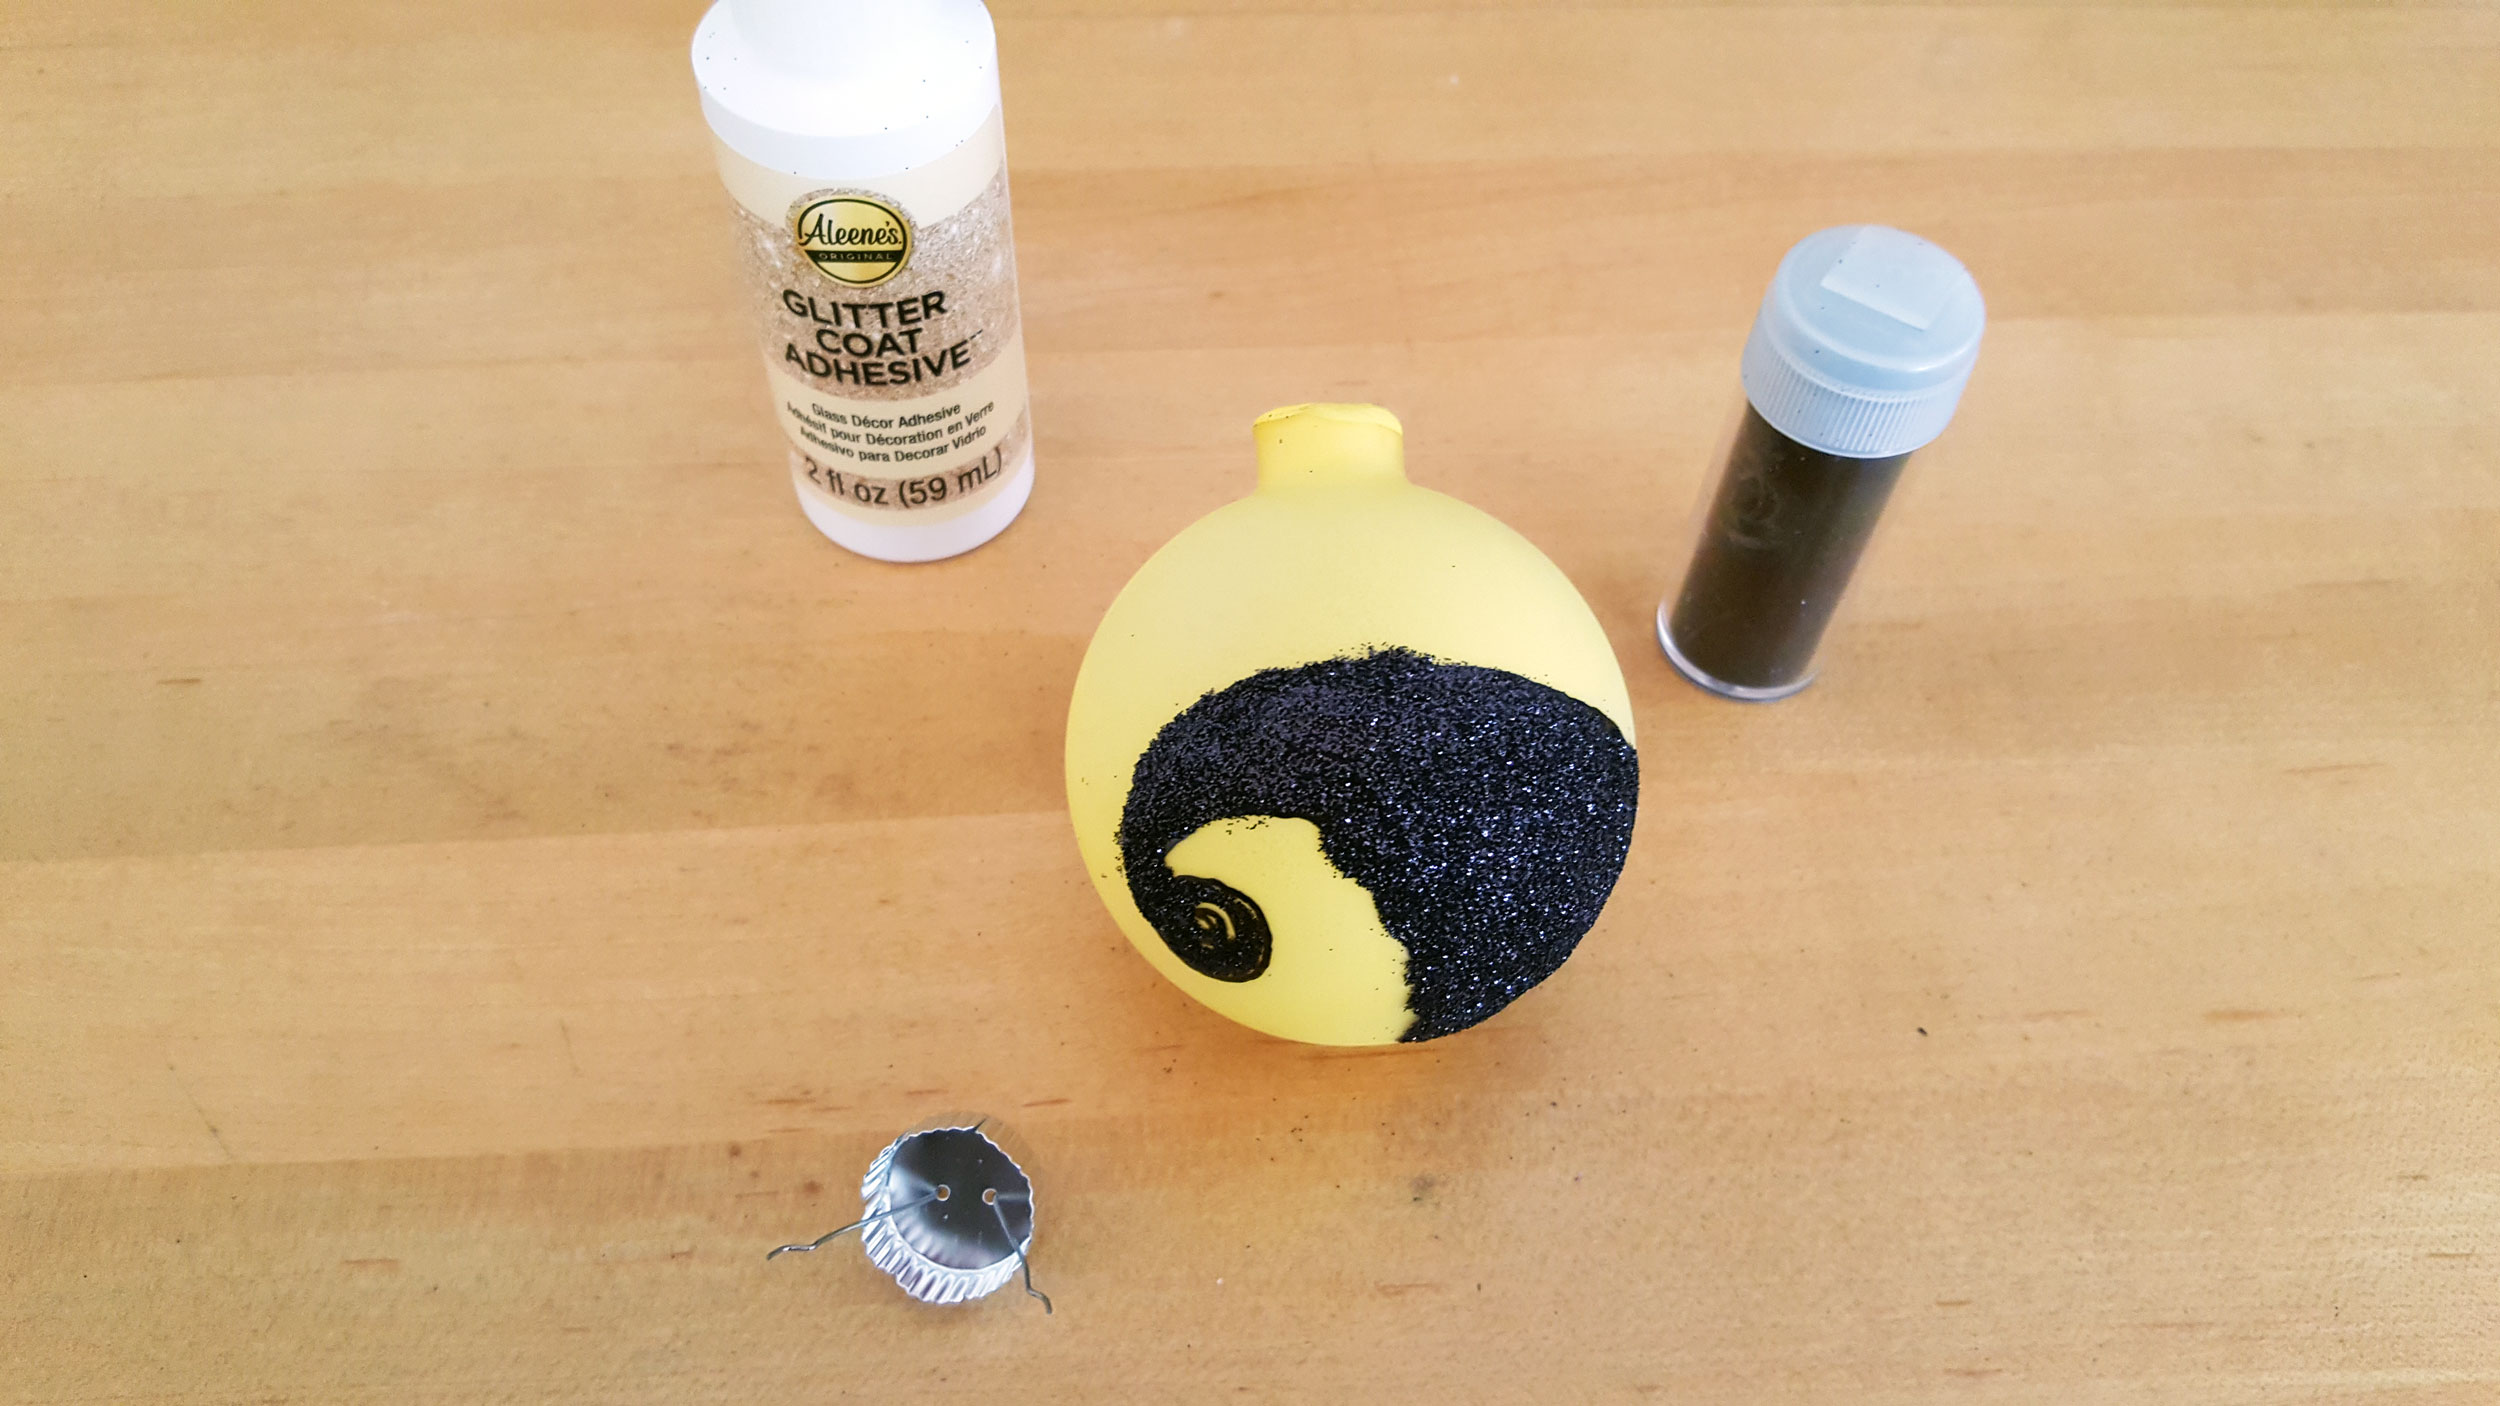 Nightmare Before Christmas Ornaments glue and shake black glitter to fill the ledge outline | OrnamentShop.com